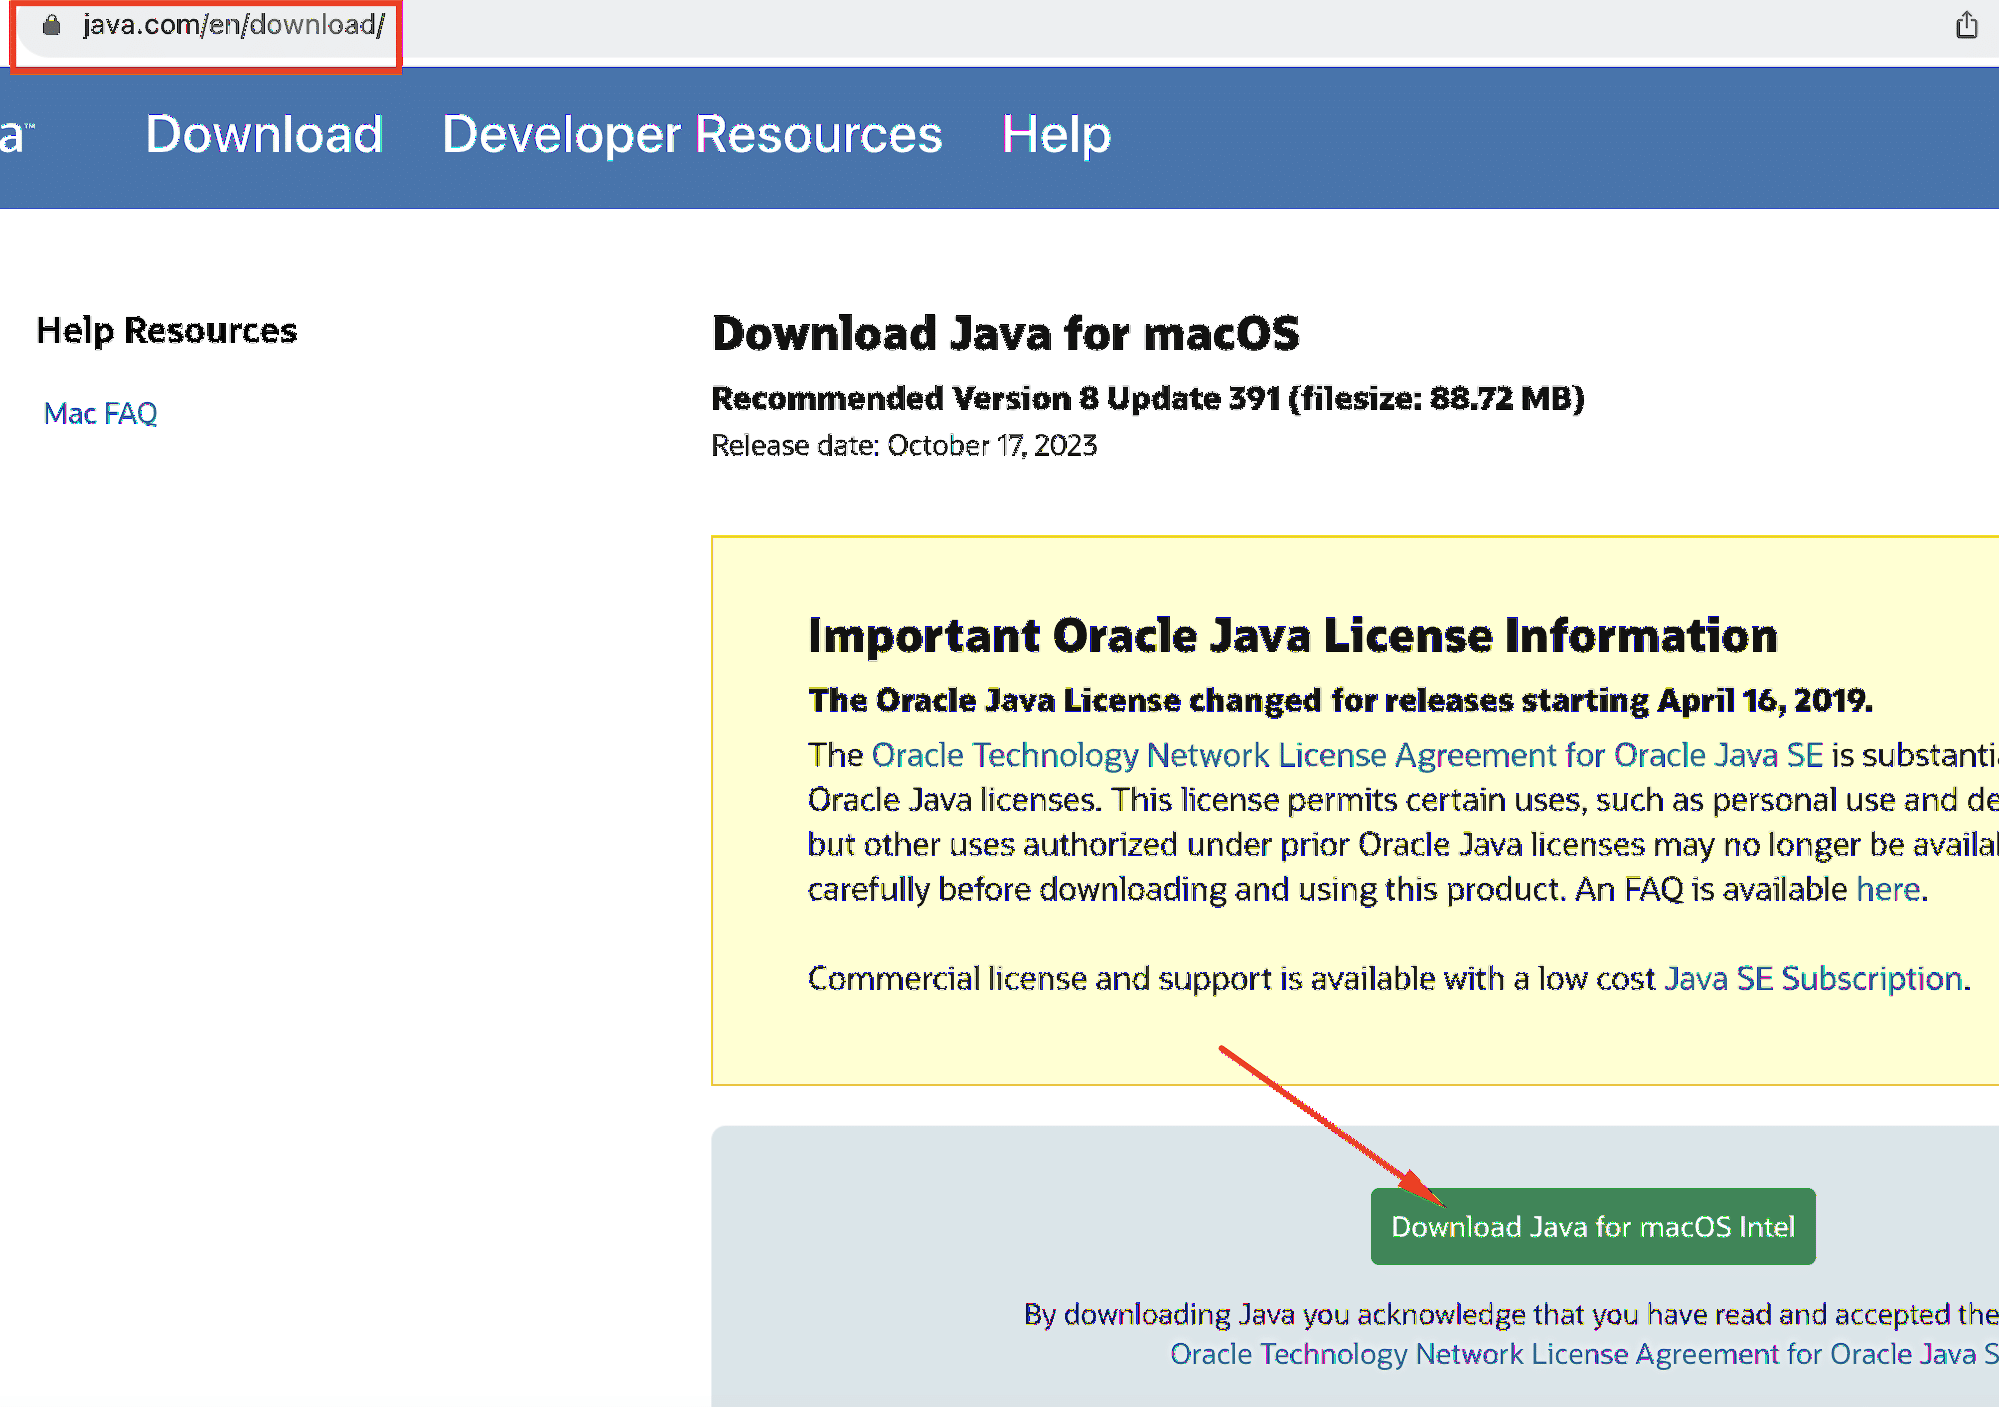 download java for macOs